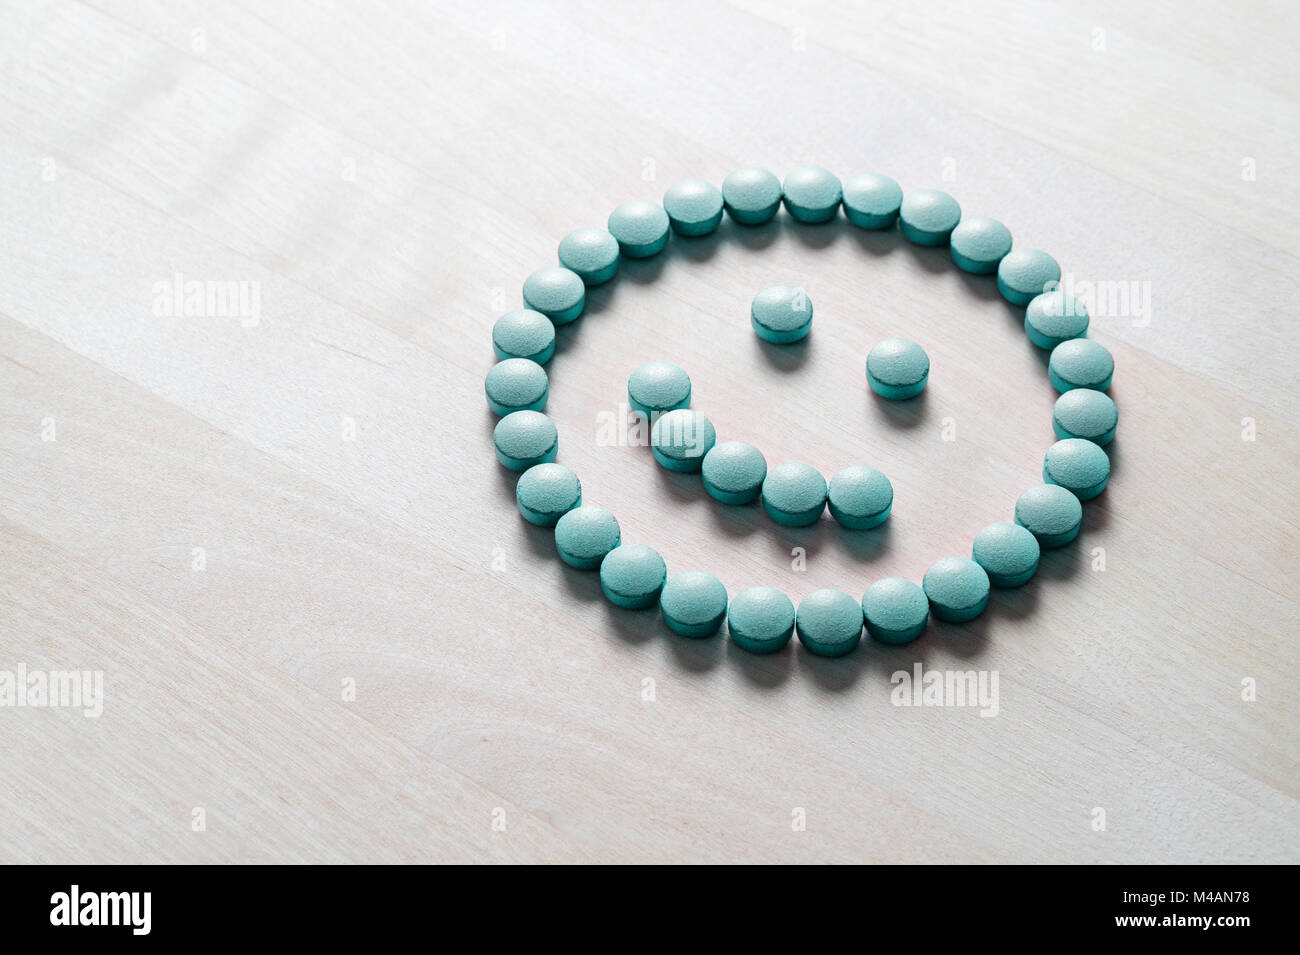 Smiley face from pills on wooden table. Happy and positive feeling from successful healing process or satisfied with health care and doctor services.  Stock Photo